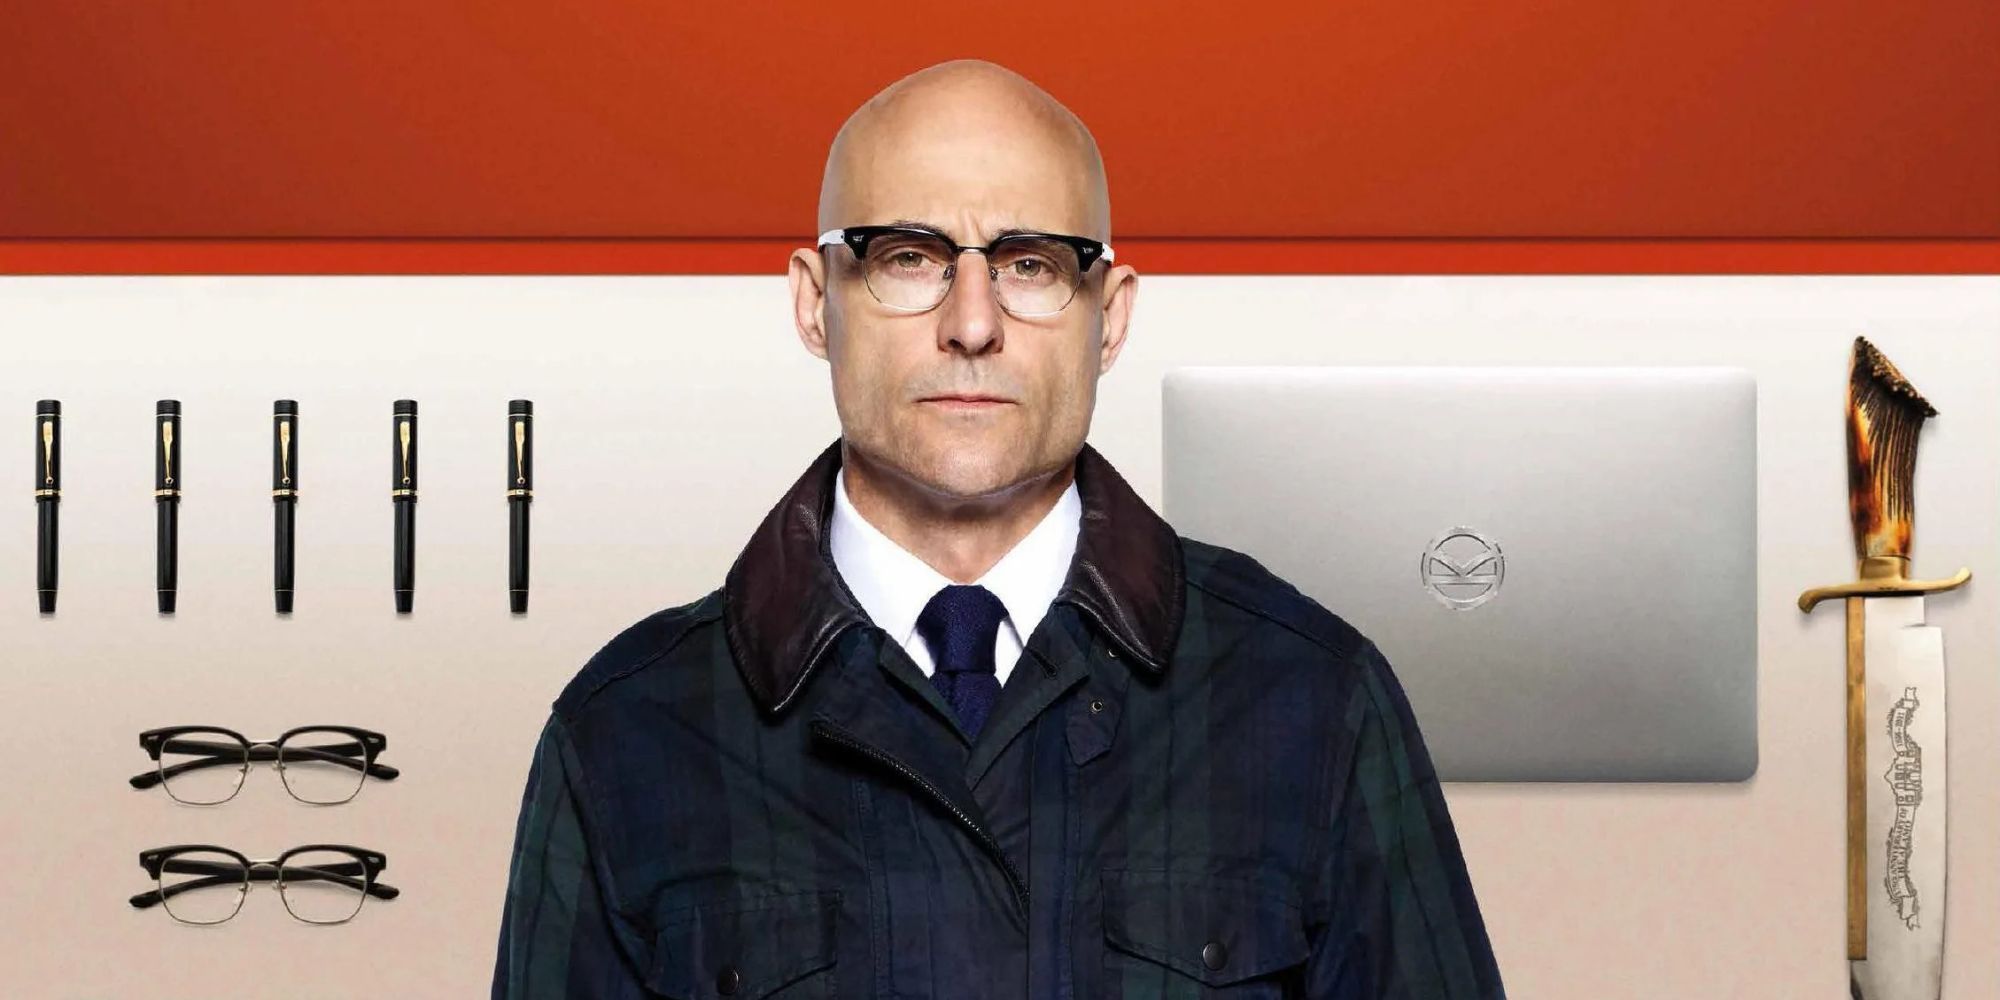 Kingsman's Merlin, played by Mark Strong, standing in front of a wall of Kingsman tech.